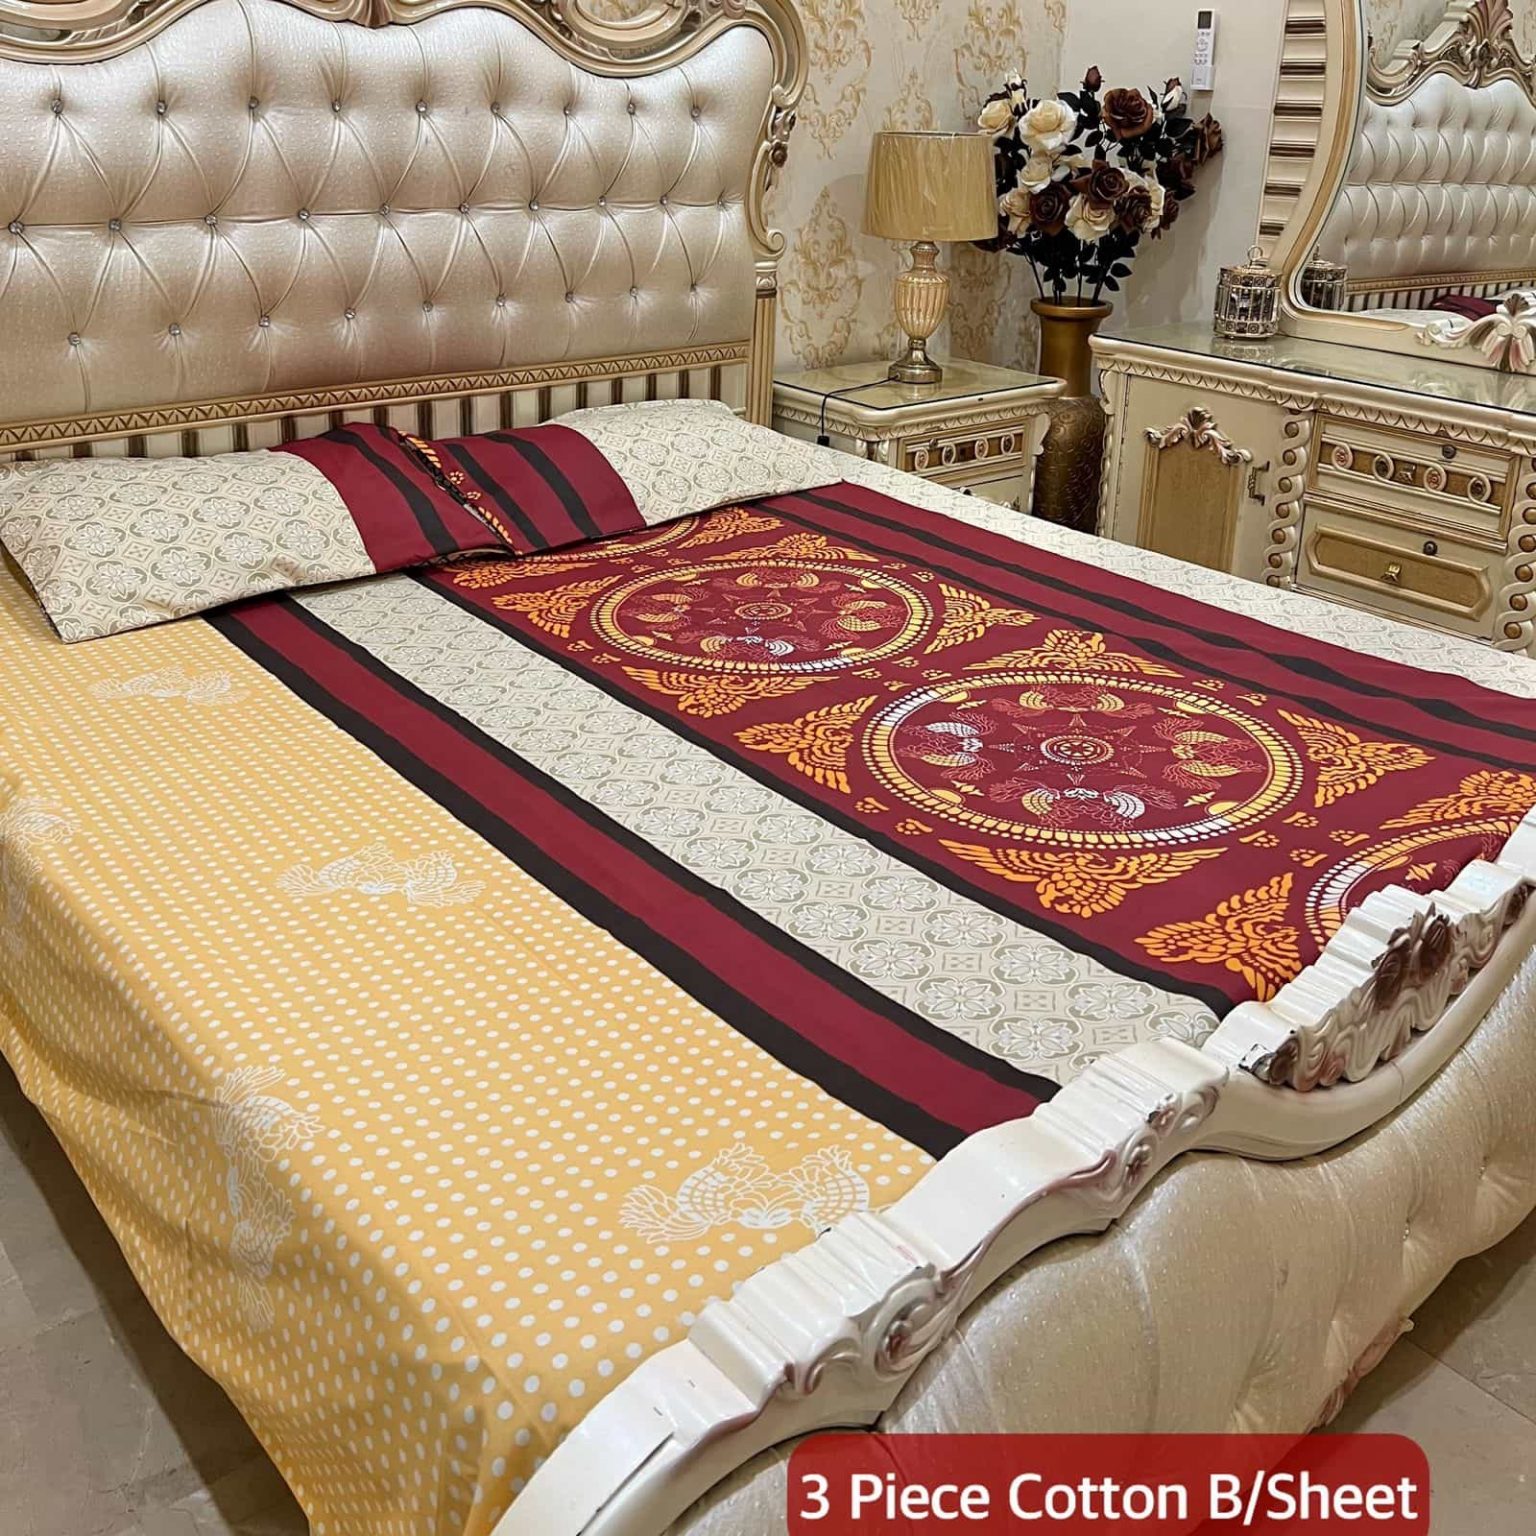 Cotton bedsheets collection